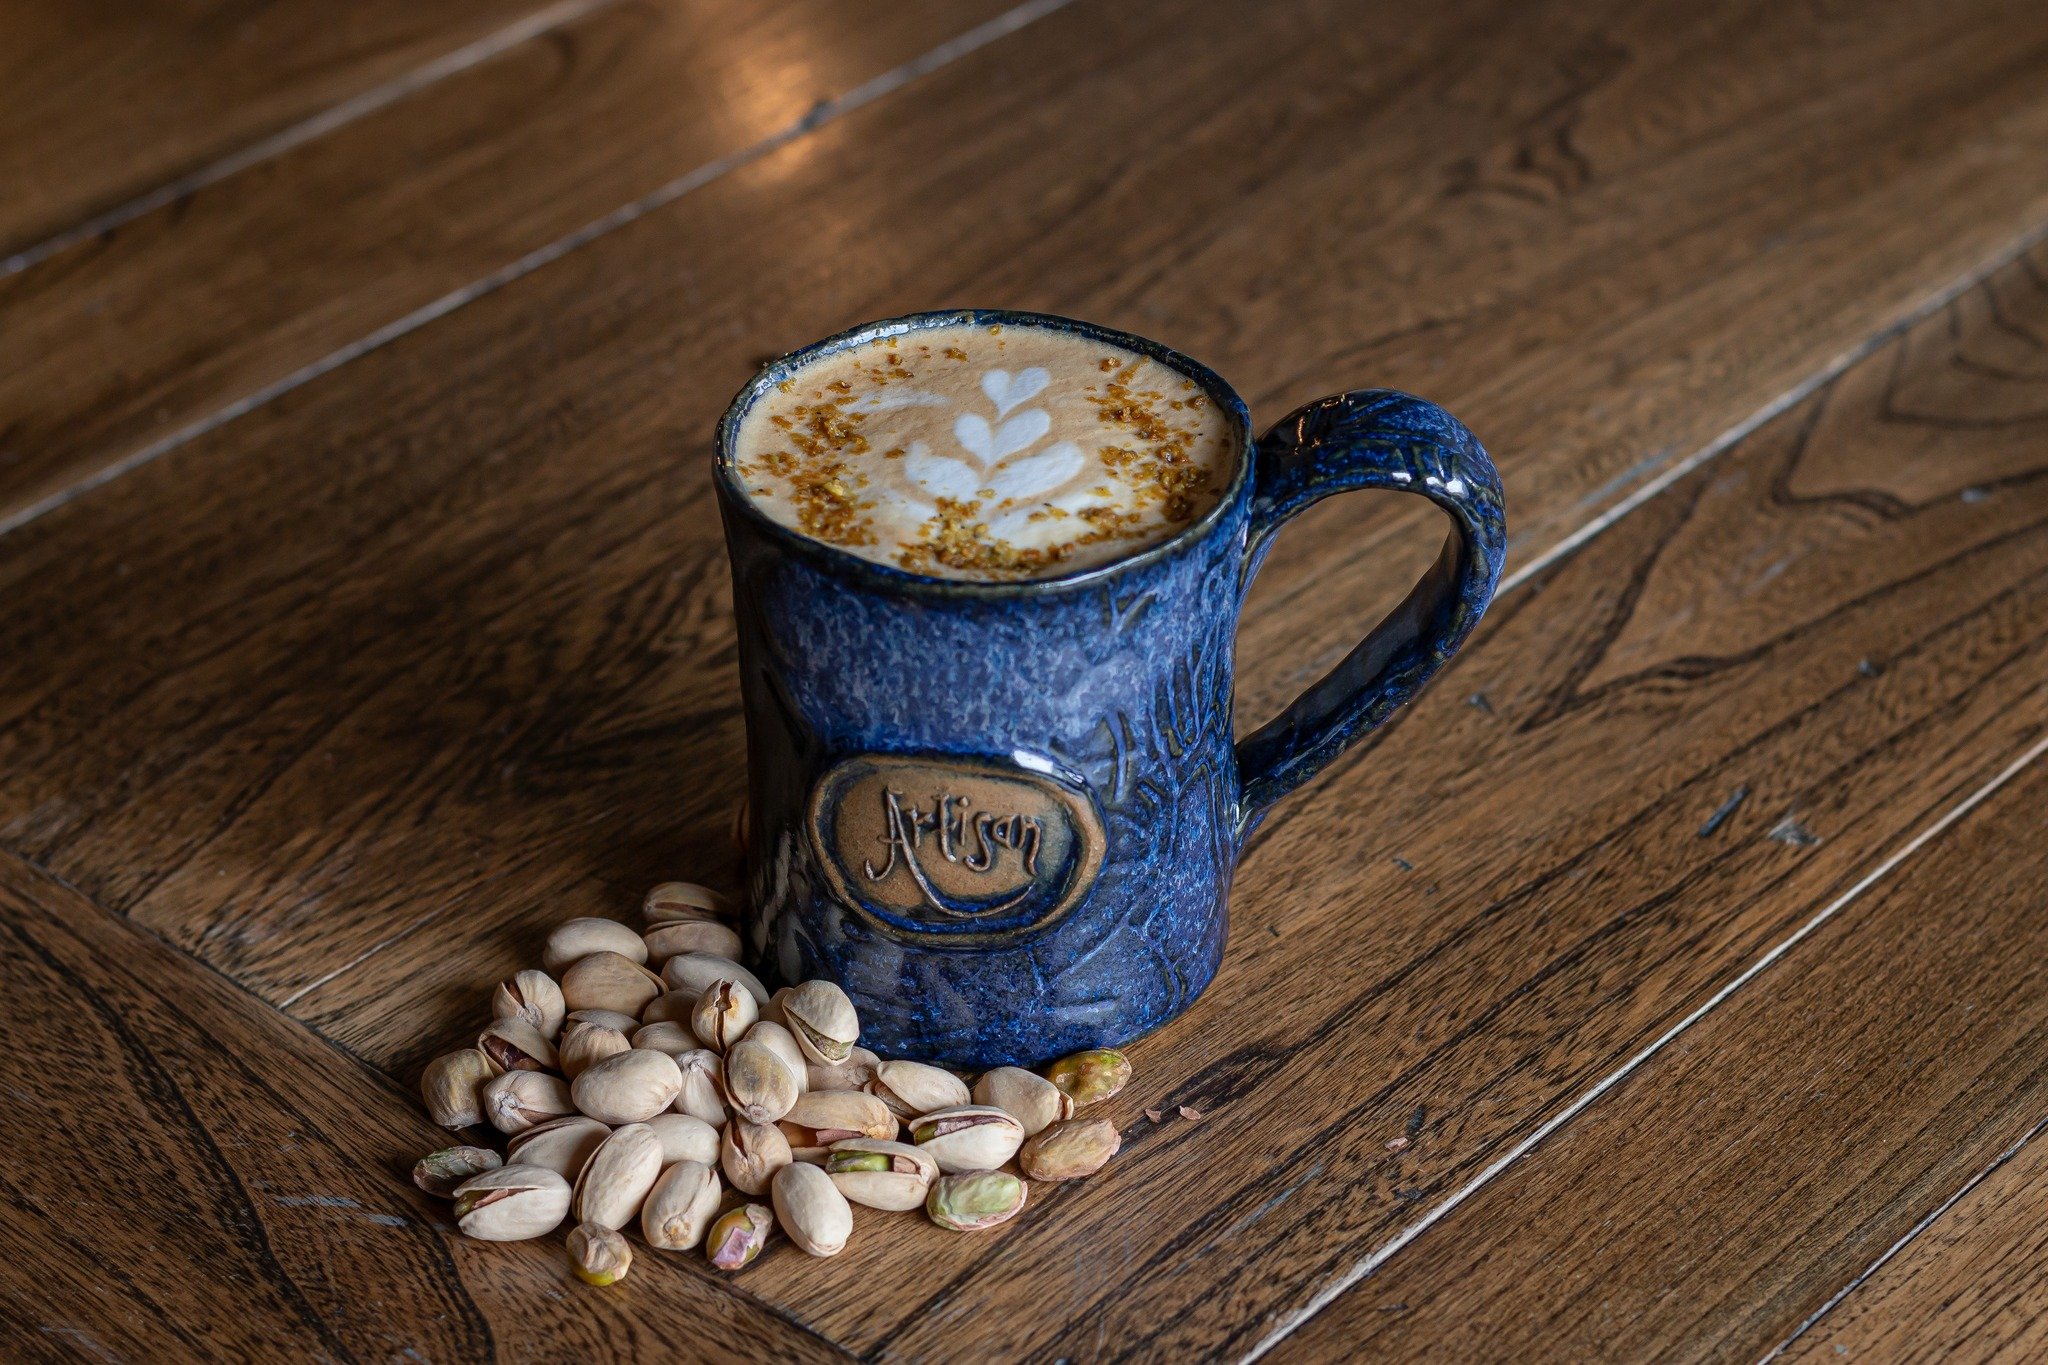 Brand new to the featured menu is our Pistachio Latte! 🍵

We are really excited about this one. It comes with our house-made pistachio syrup and features our light roast espresso! We finish it off with milk, of course, and it is topped with pistachi